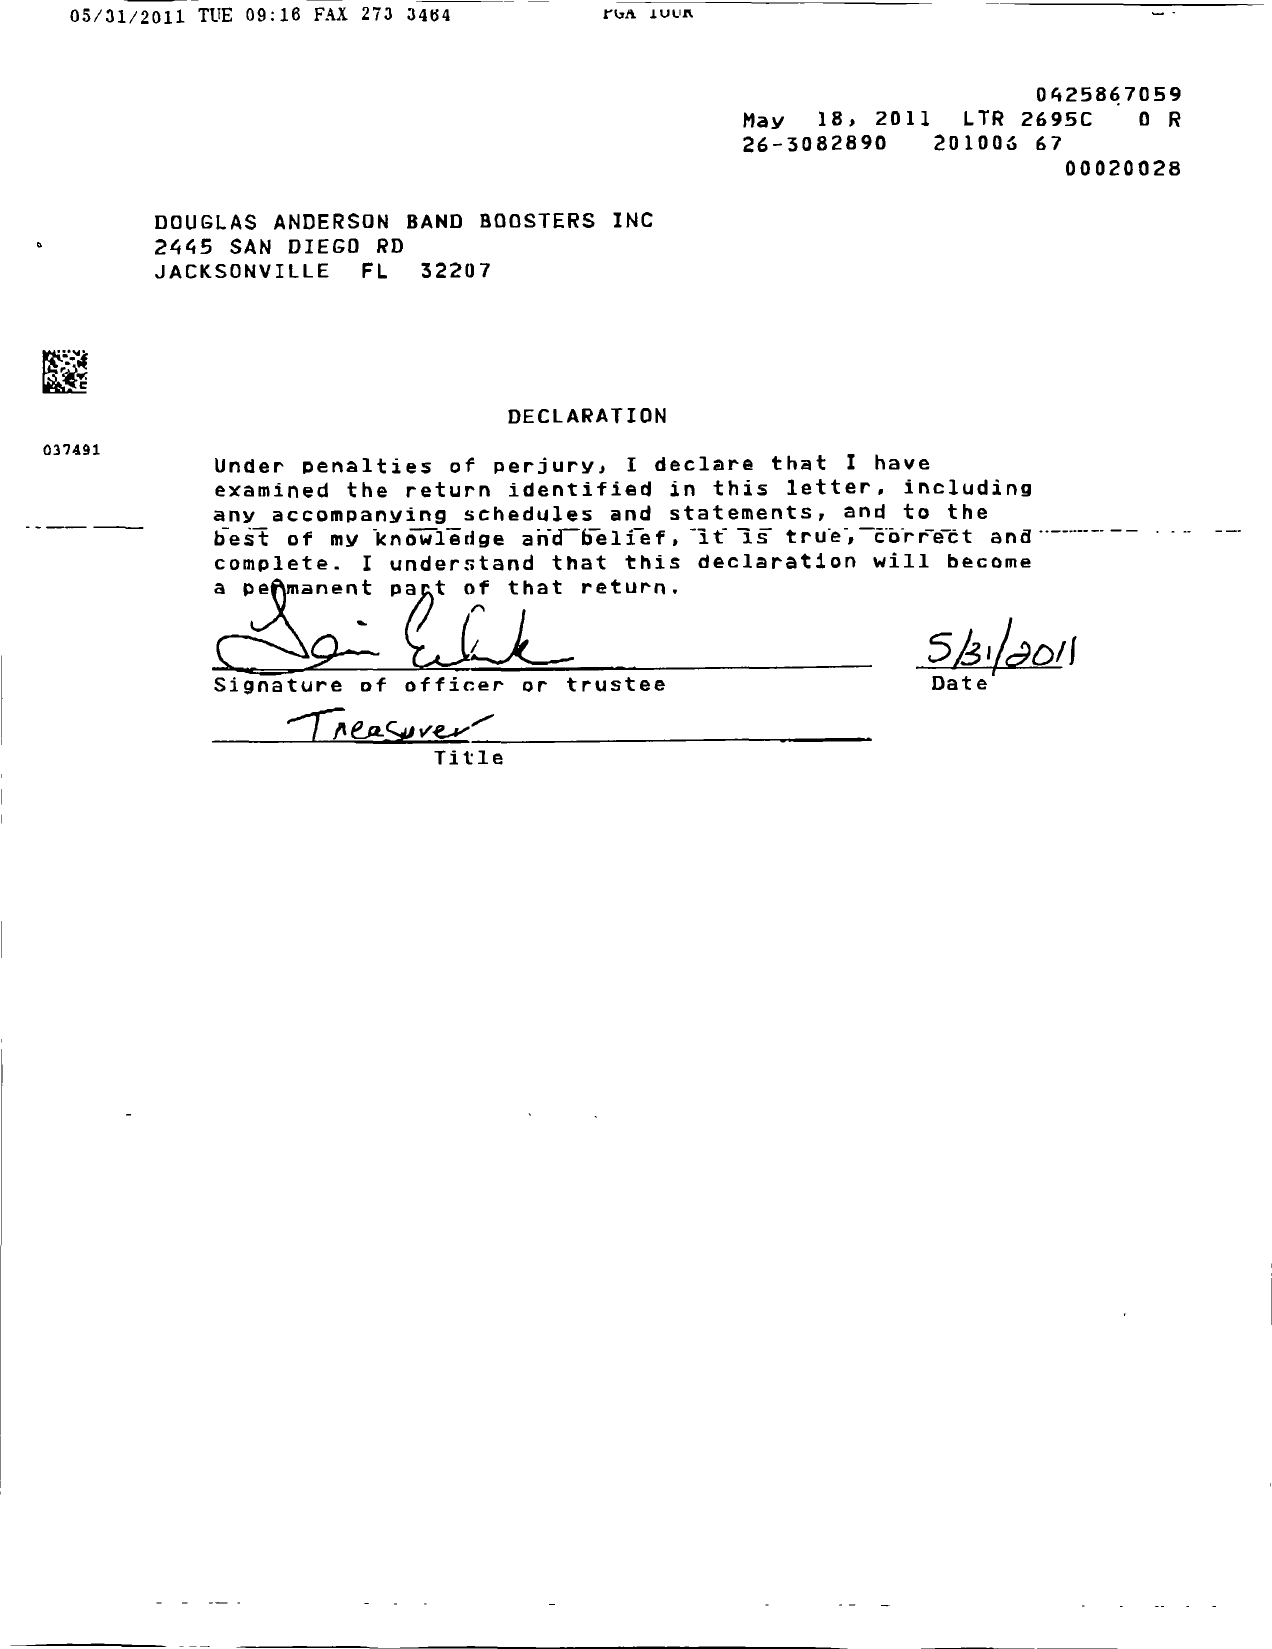 Image of first page of 2009 Form 990ER for Douglas Anderson Band Boosters